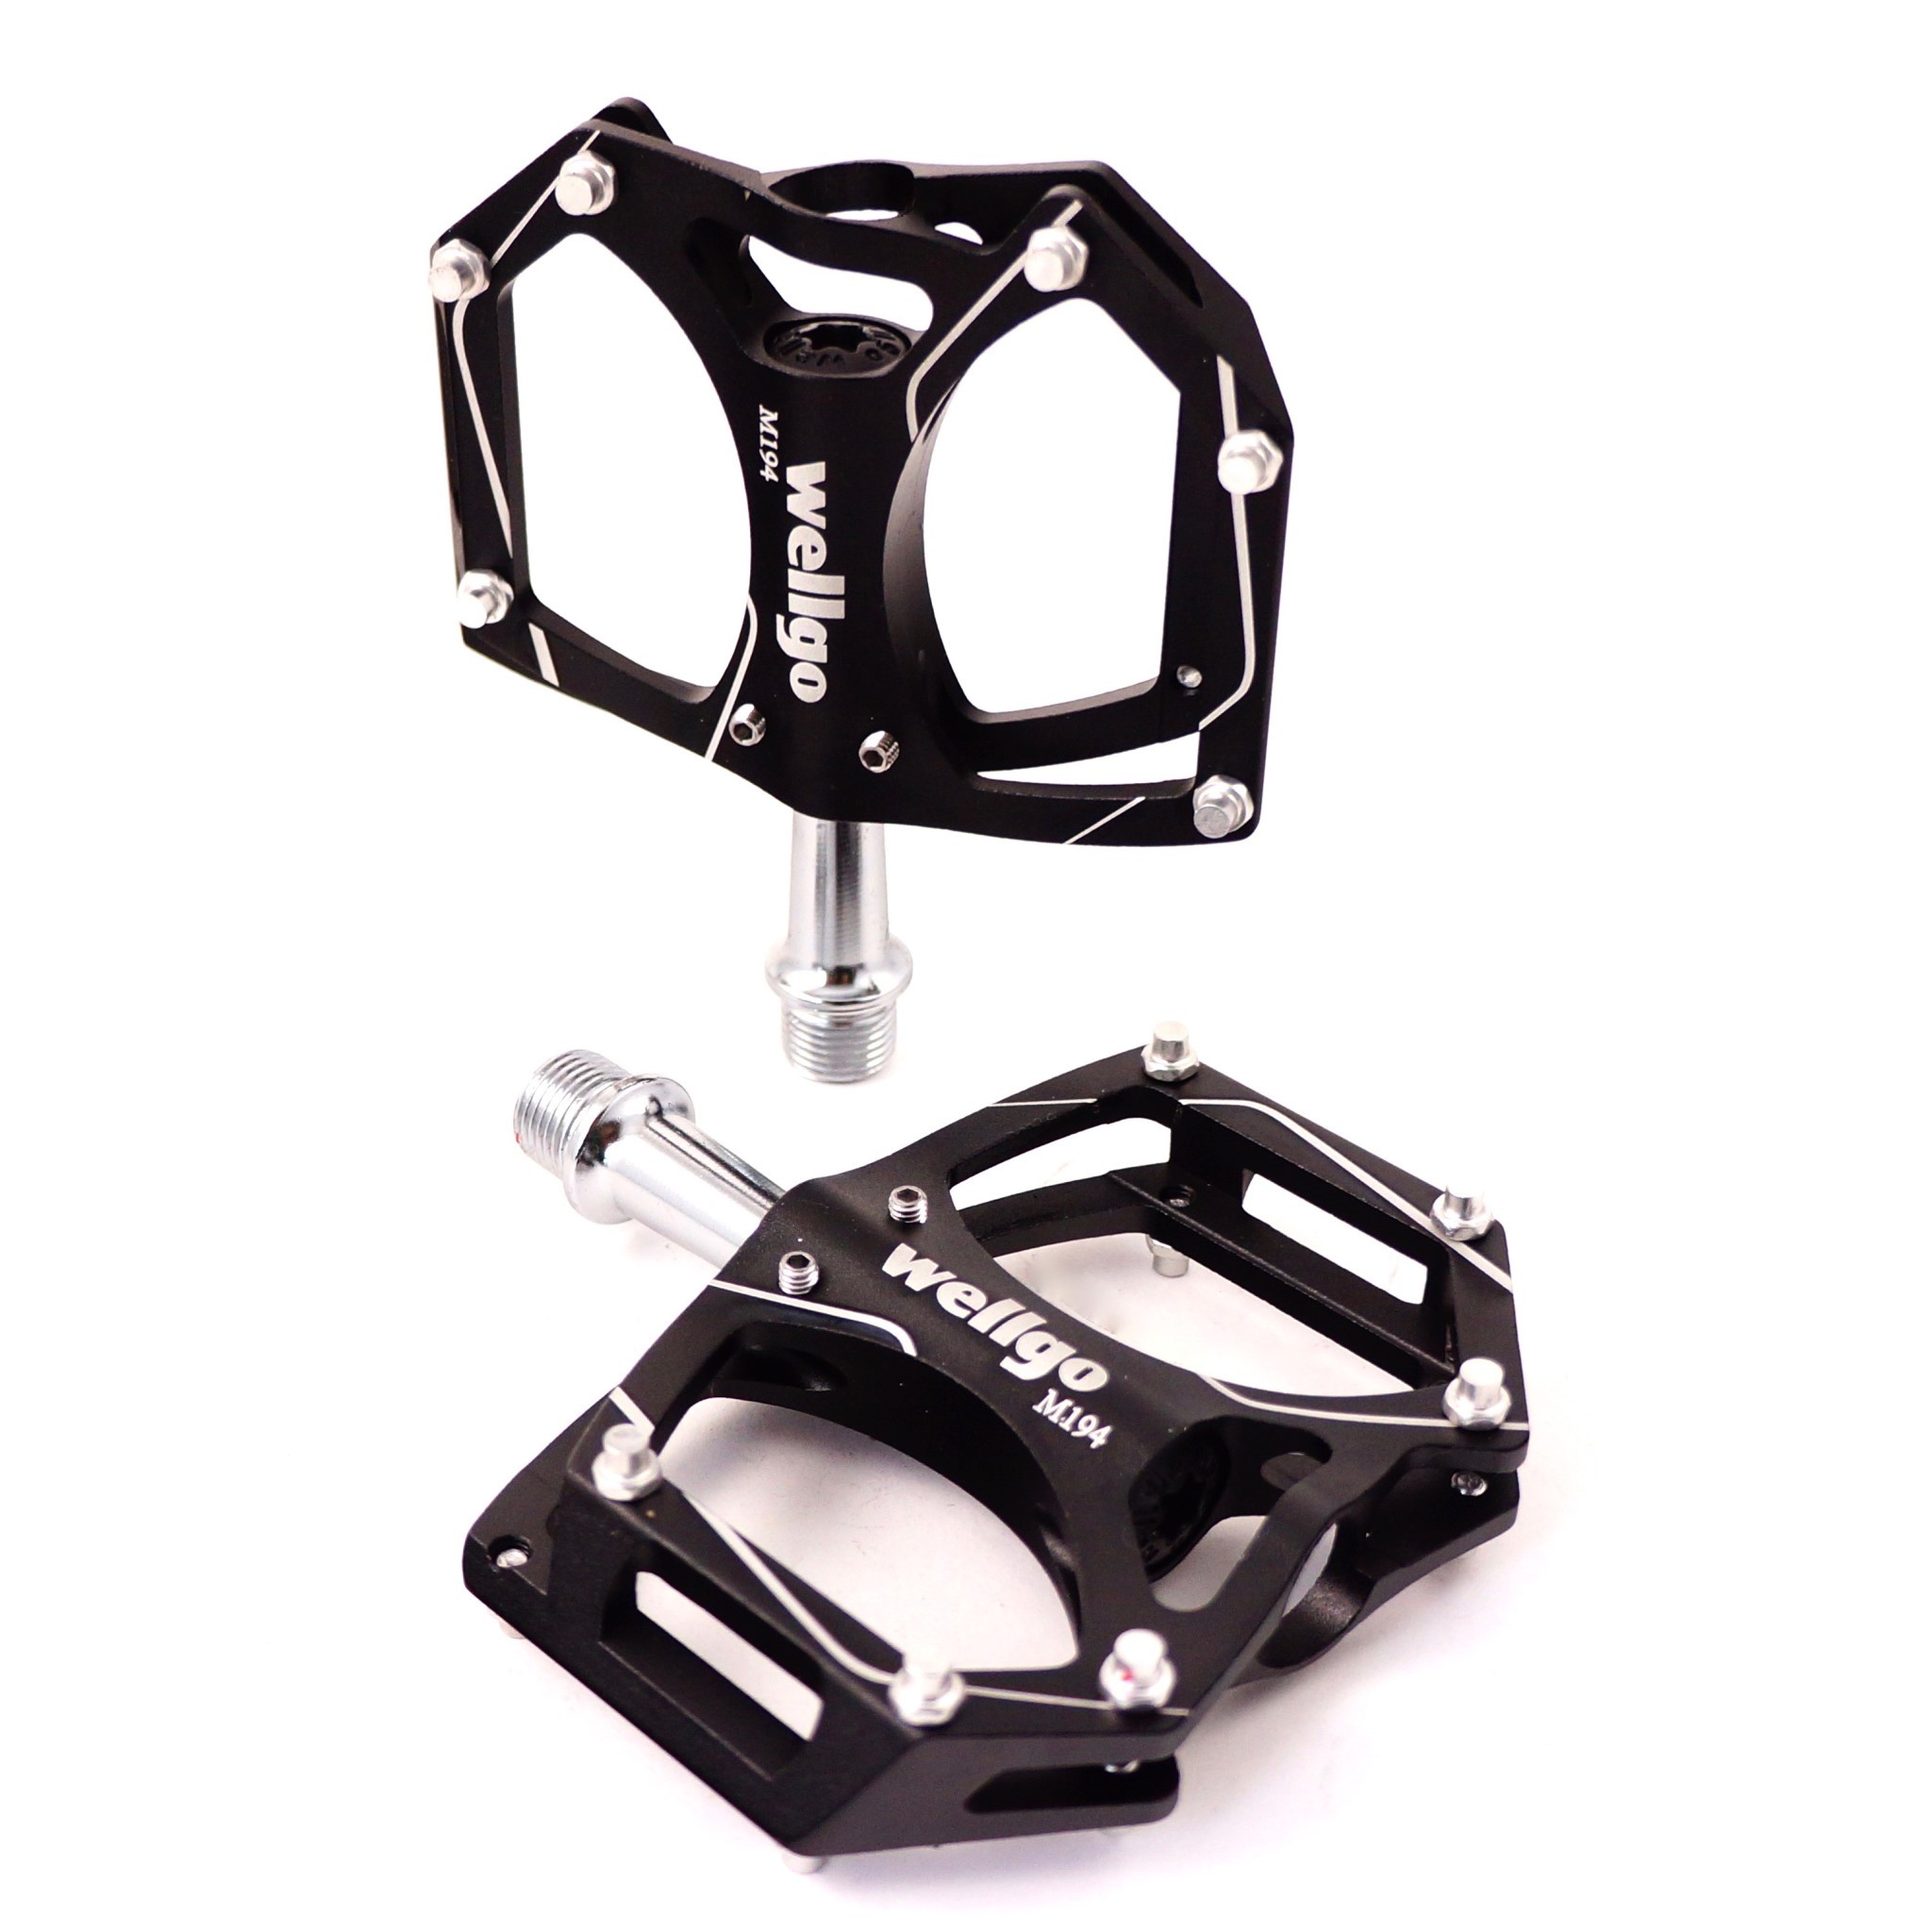 Wellgo LU-C25 Aluminum Bike Bicycle Cycling MTB Pedals By YSYT Deal